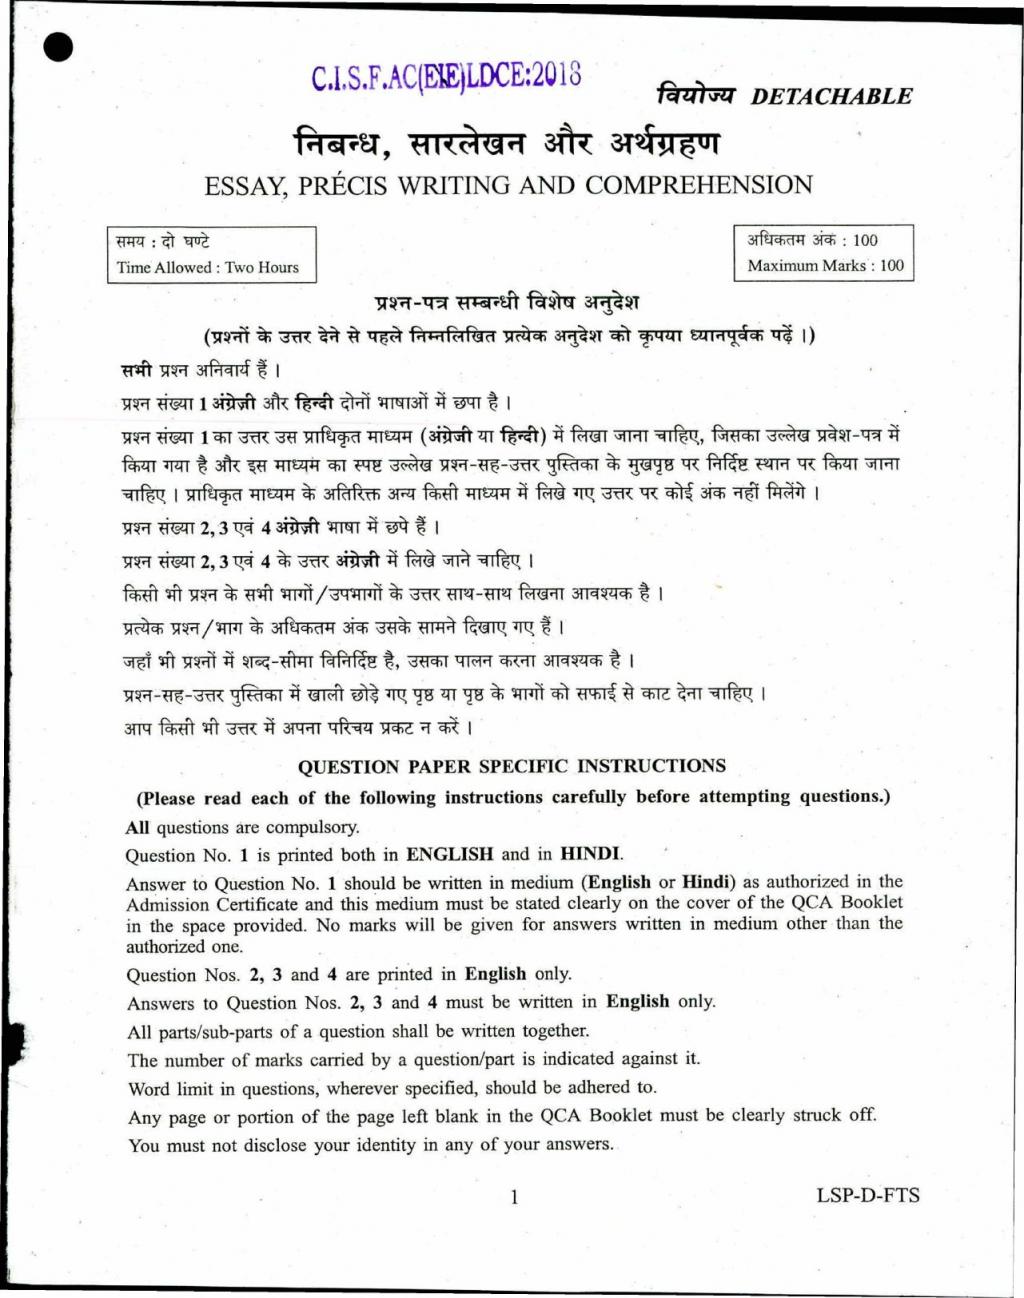 CISF Examination 2018 Question Paper II - Image 1